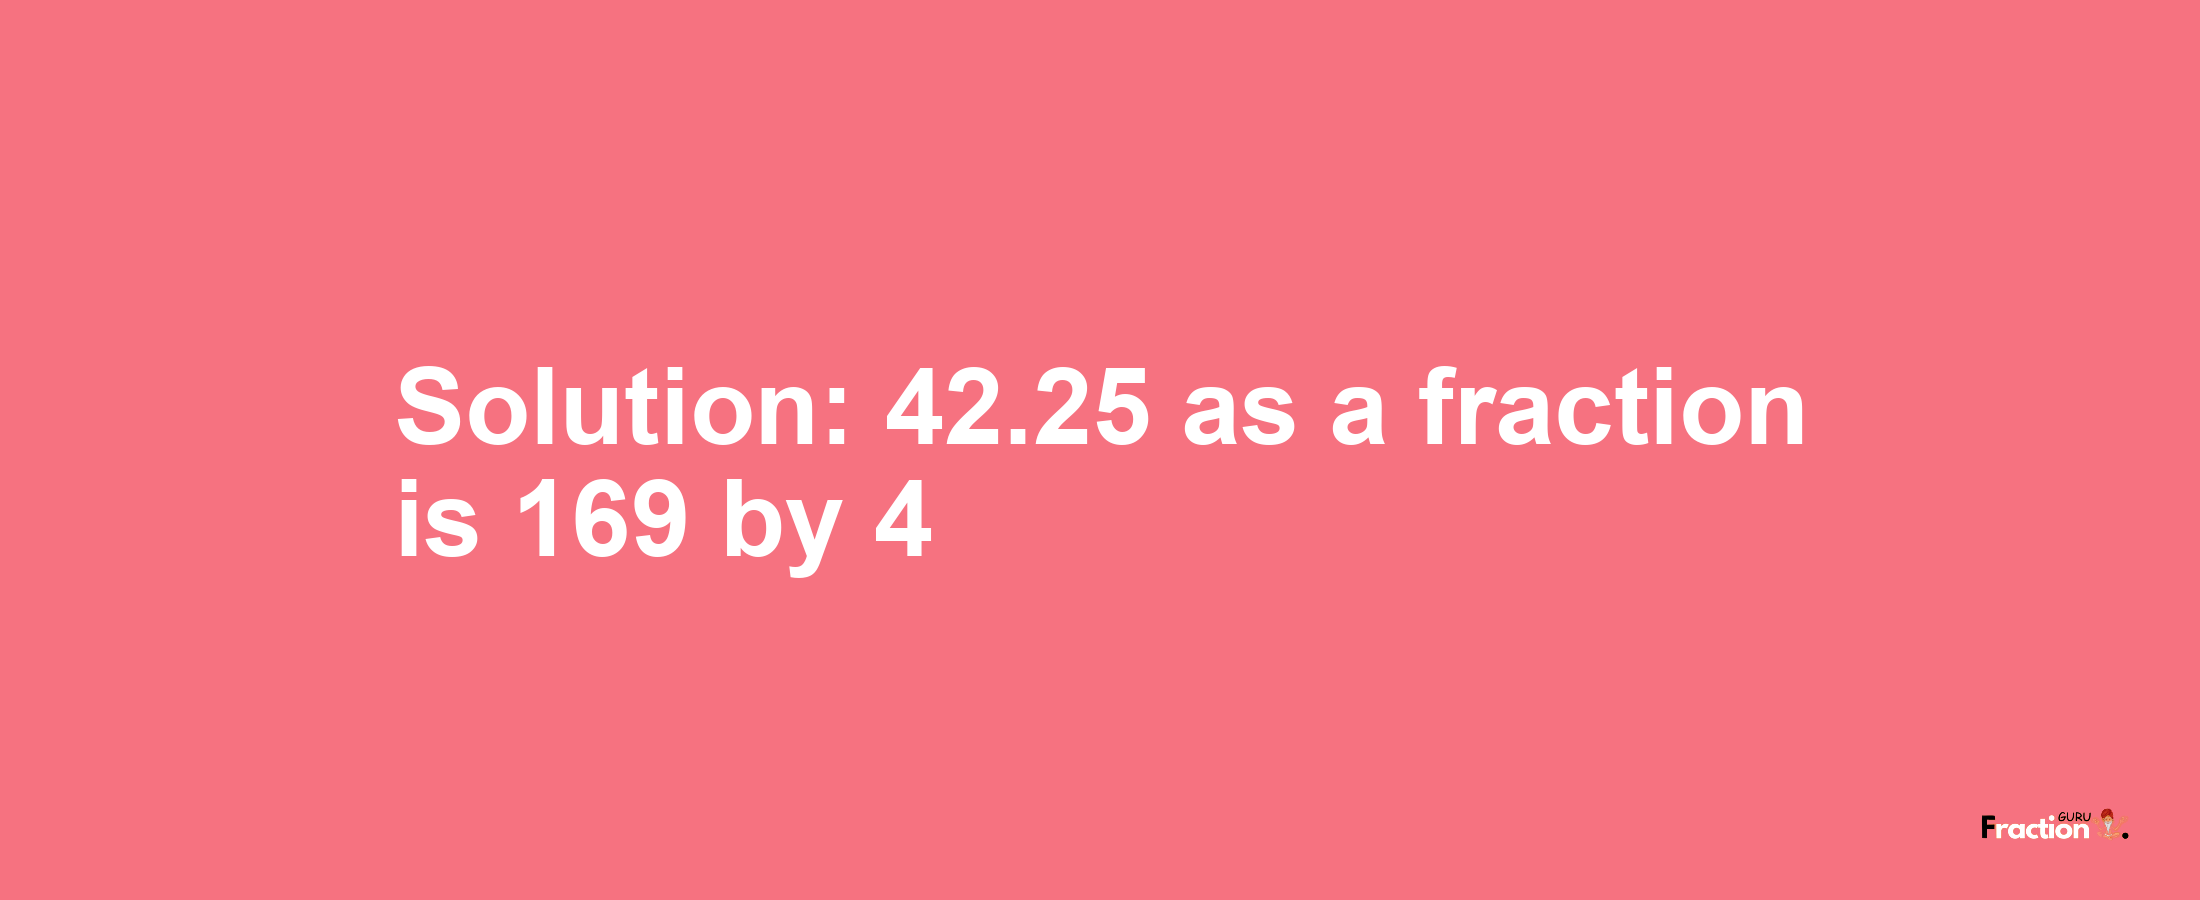 Solution:42.25 as a fraction is 169/4